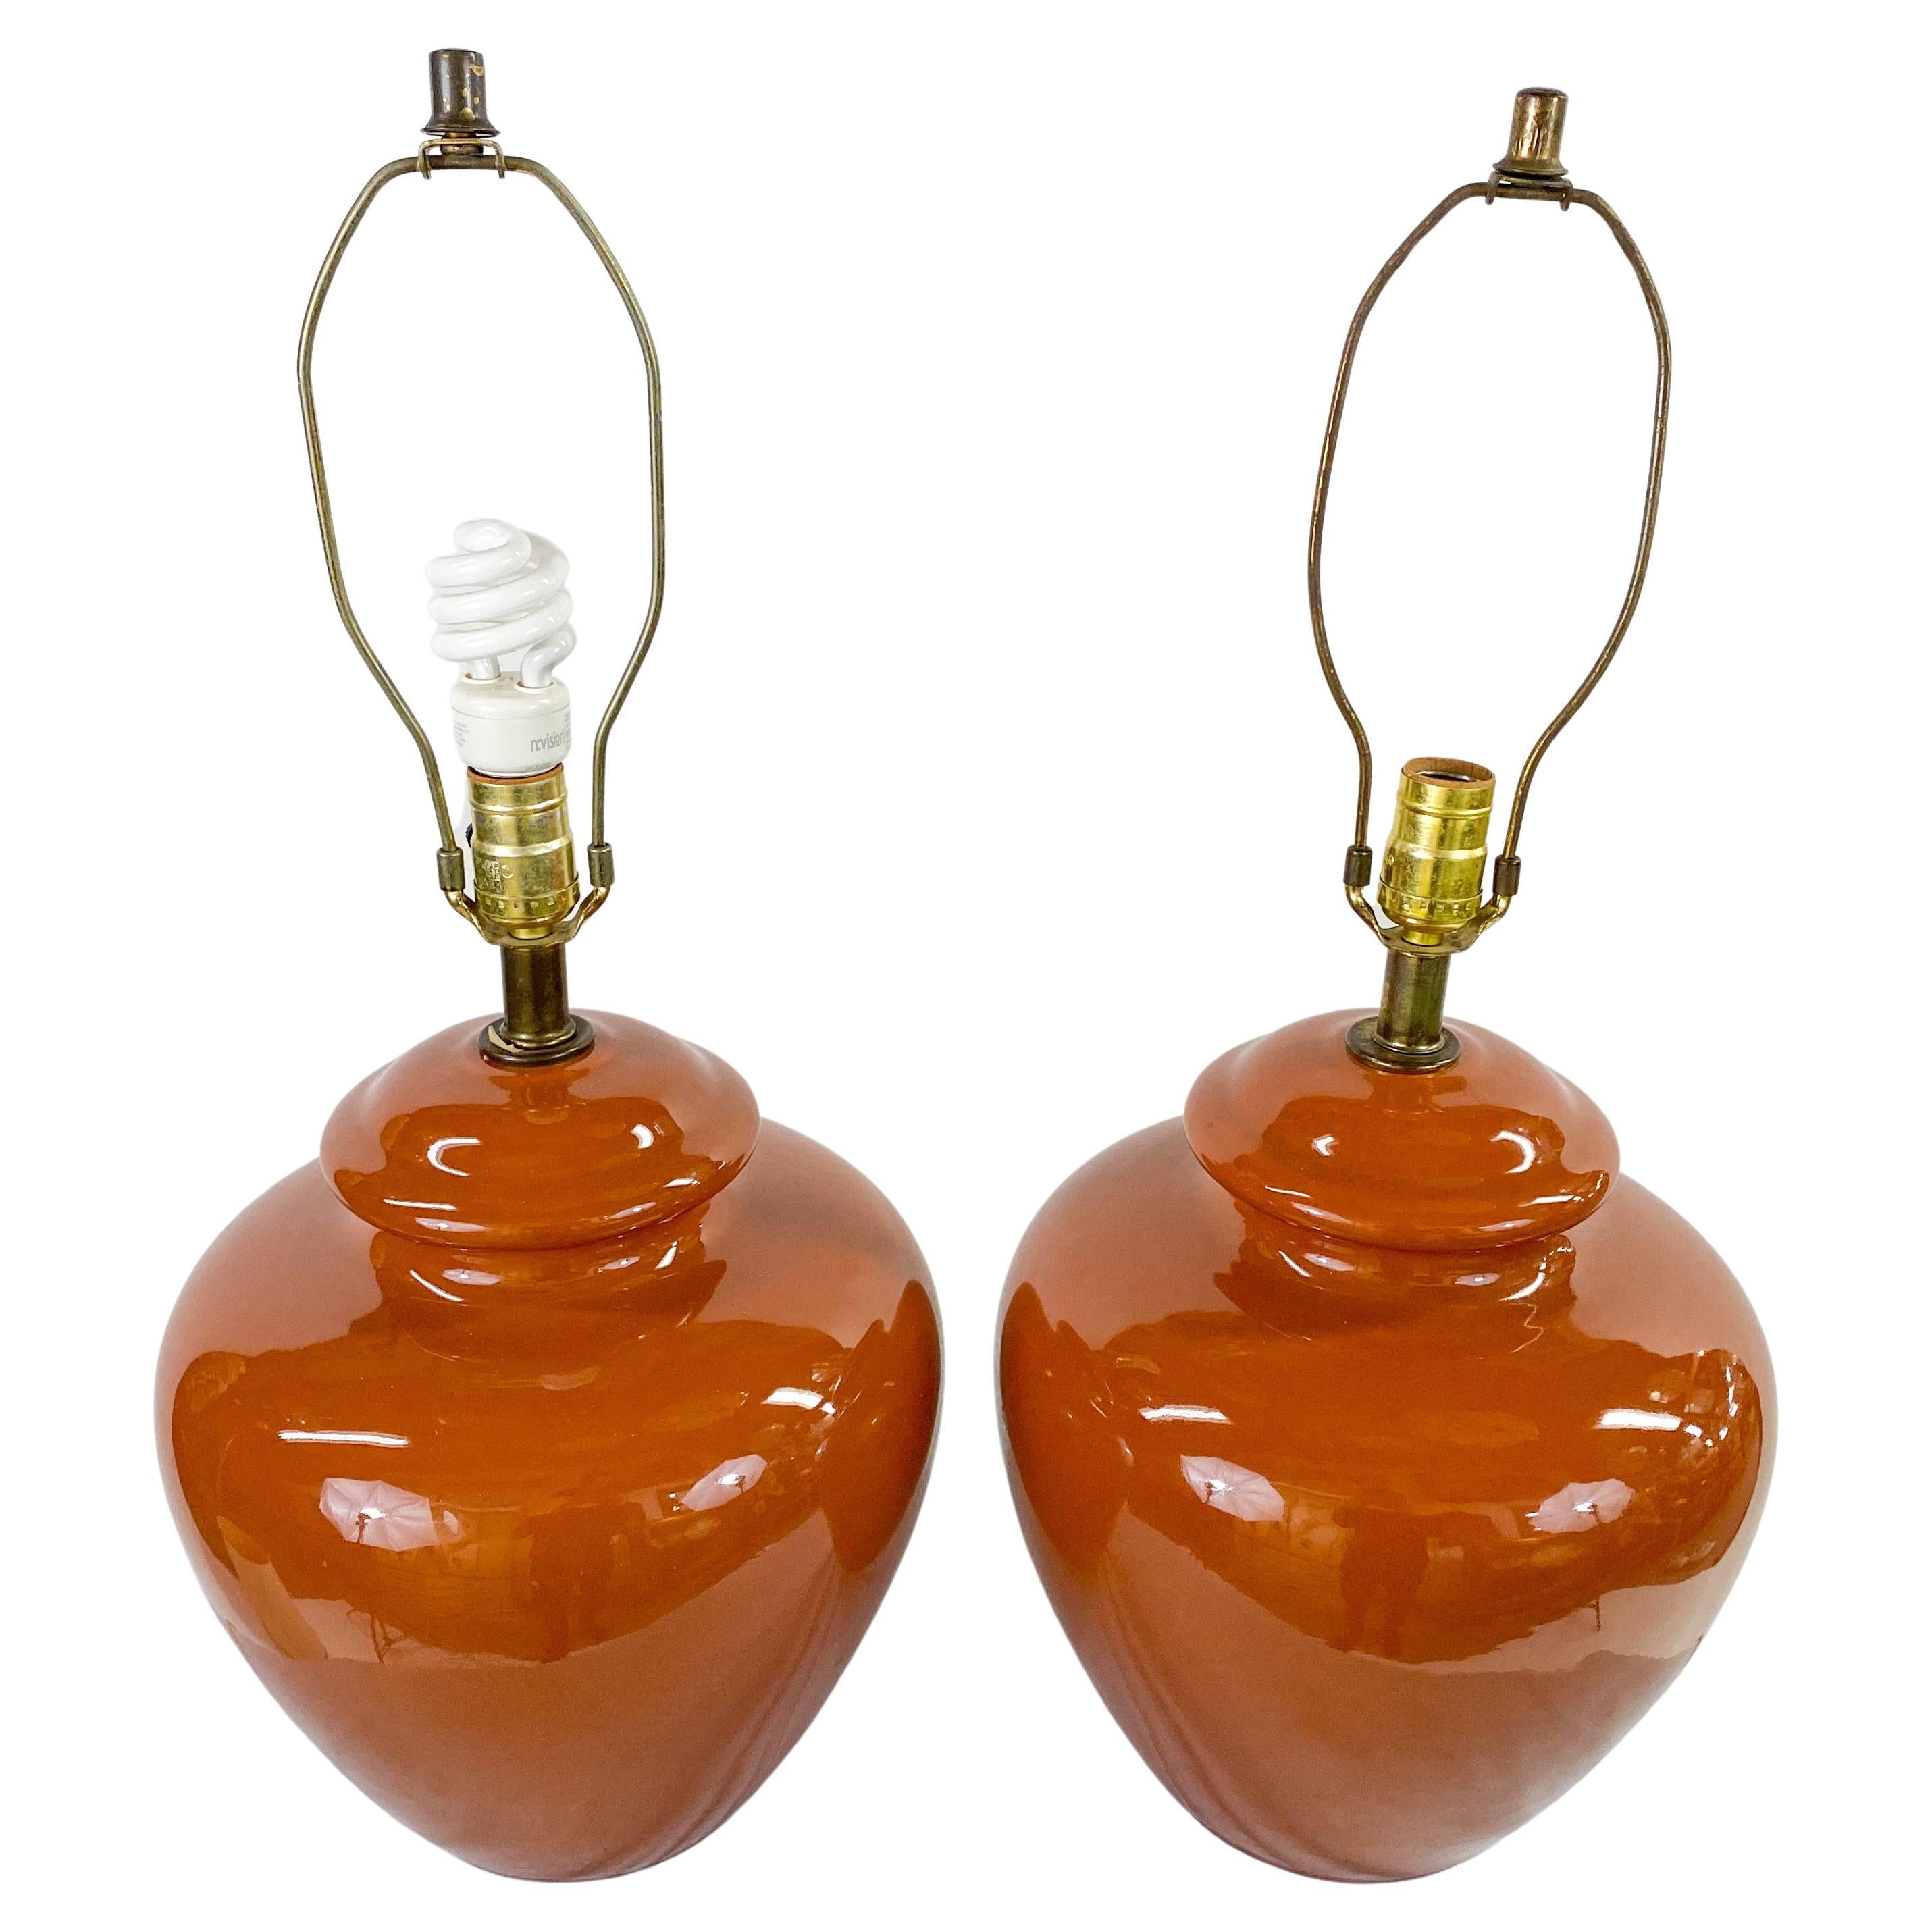 A pair of Mid-Century Modern table lamps. Timeless in style, the lamps are made of ceramics in an oval shape and featuring a tawny brown color. Both lamps are wired and in working condition. 

Dimensions: 25